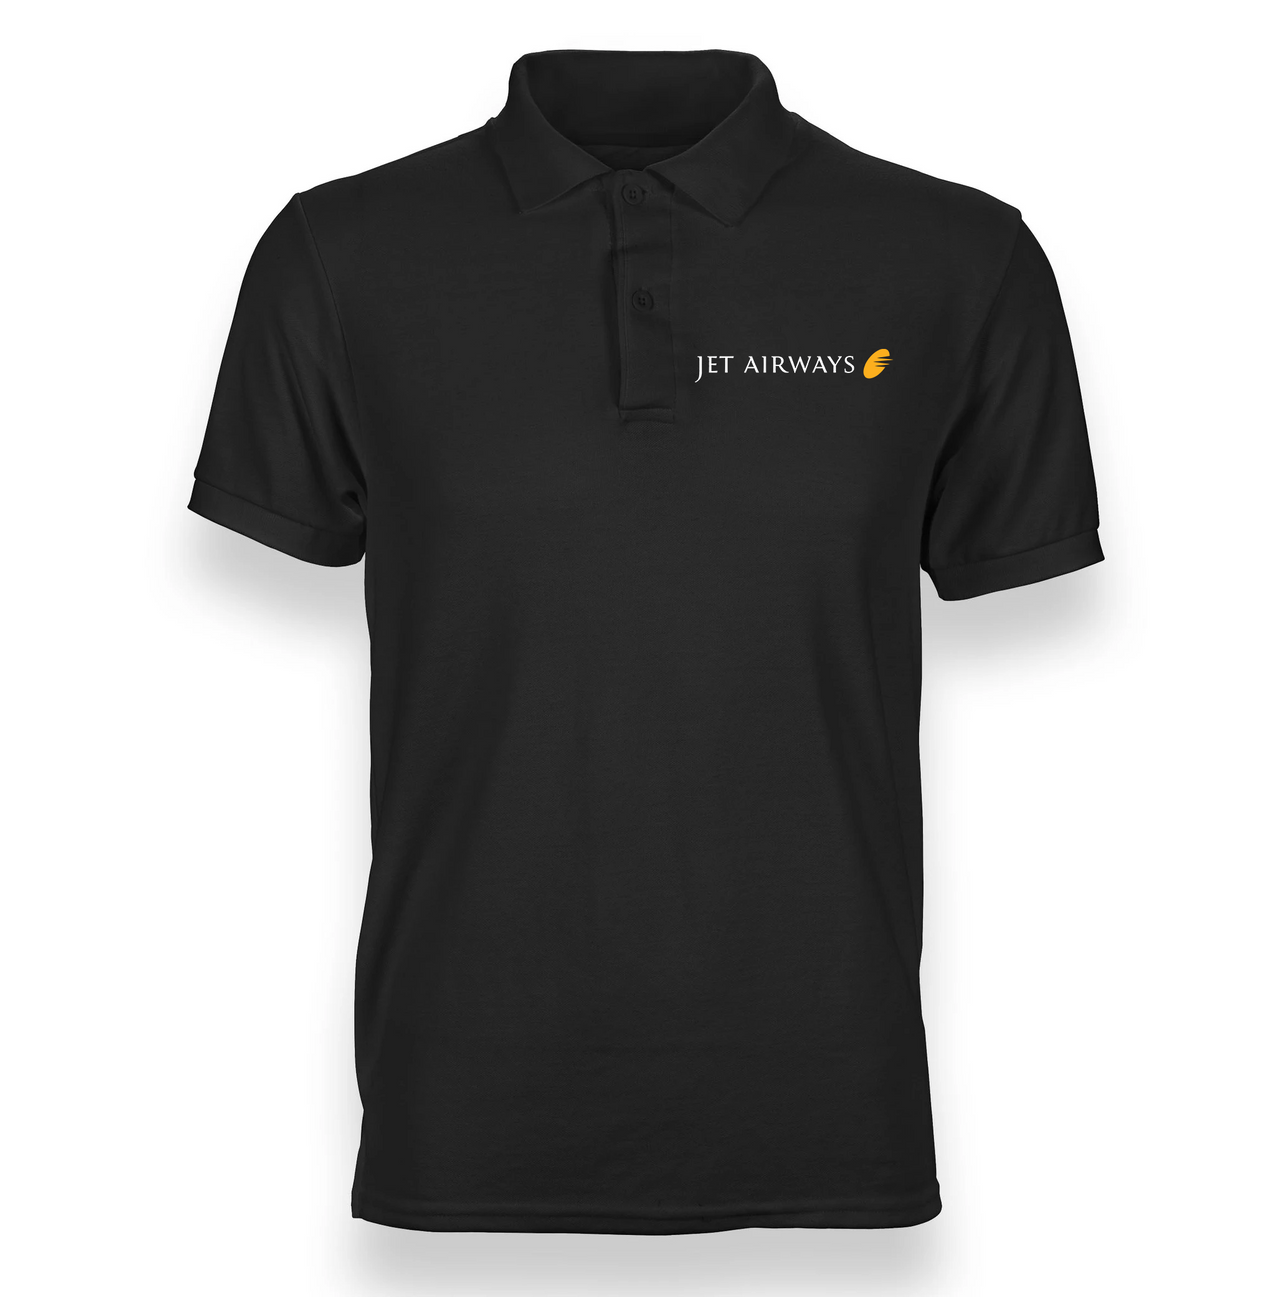 JET AIRLINES POLO T-SHIRT